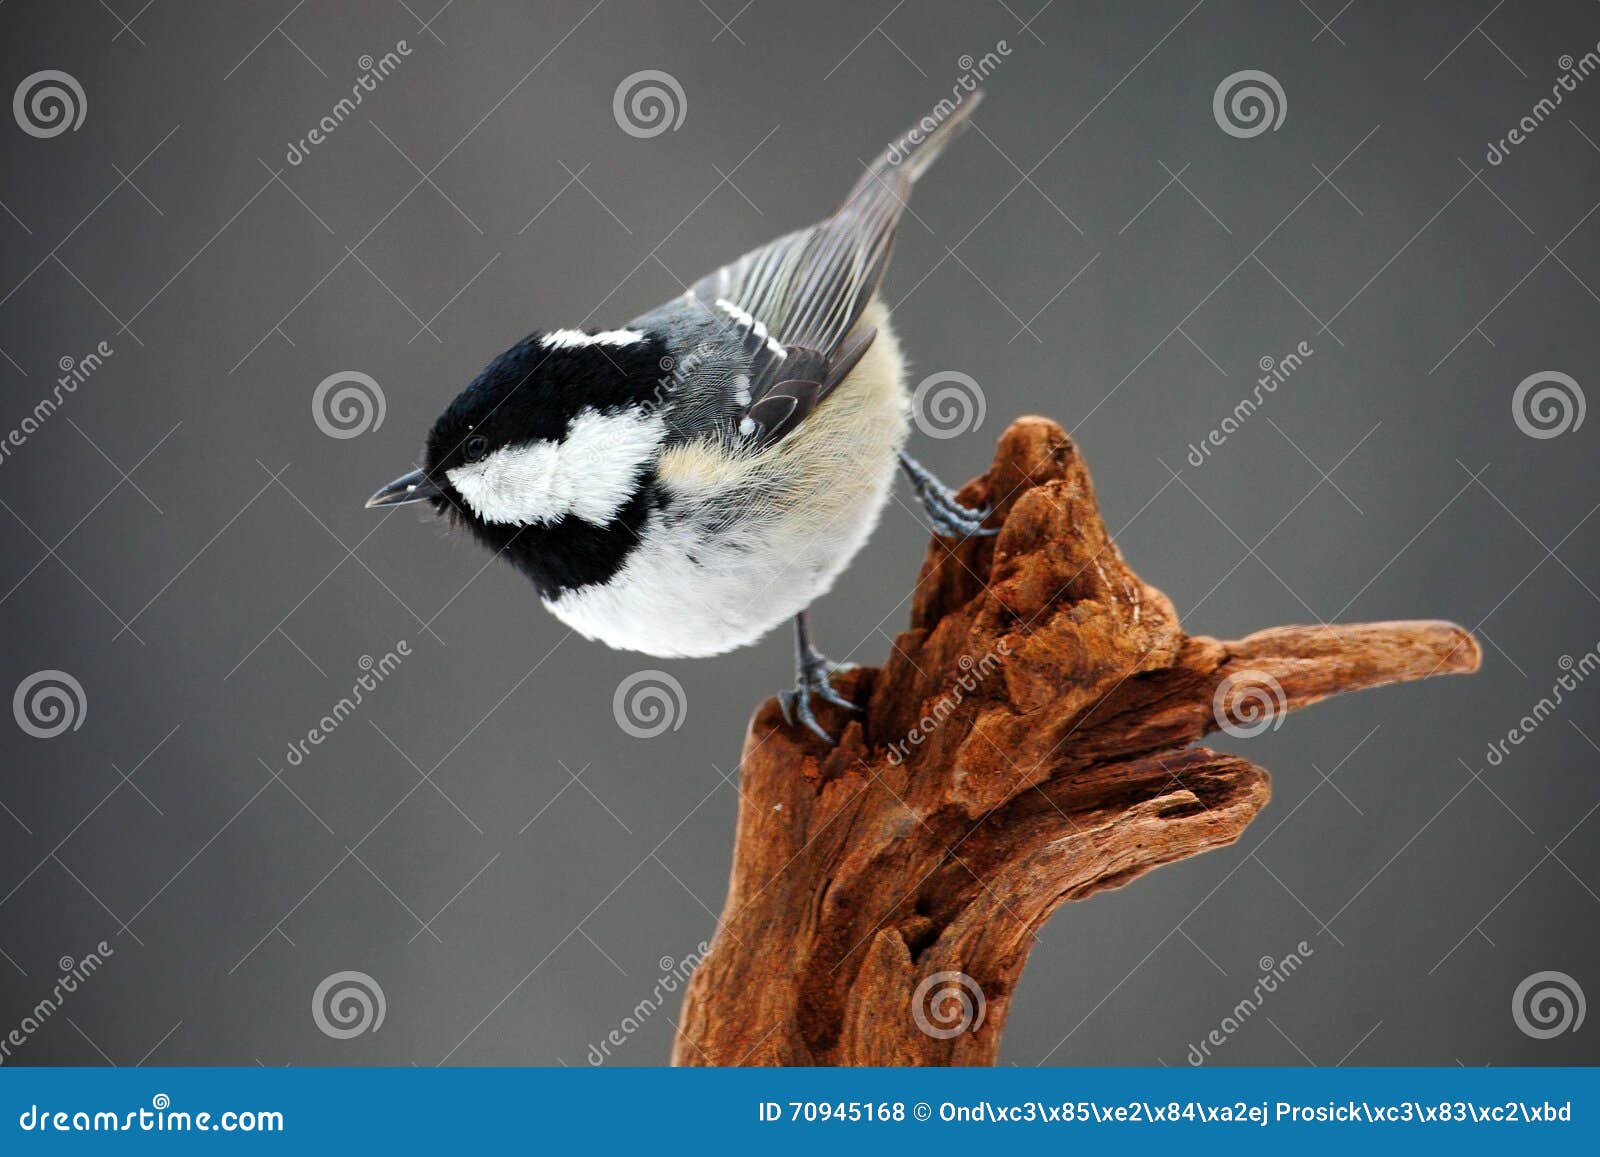 coal tit, parus ater, cute blue and yellow songbird in winter scene, snow flake and nice snow flake and nice lichen branch, bird